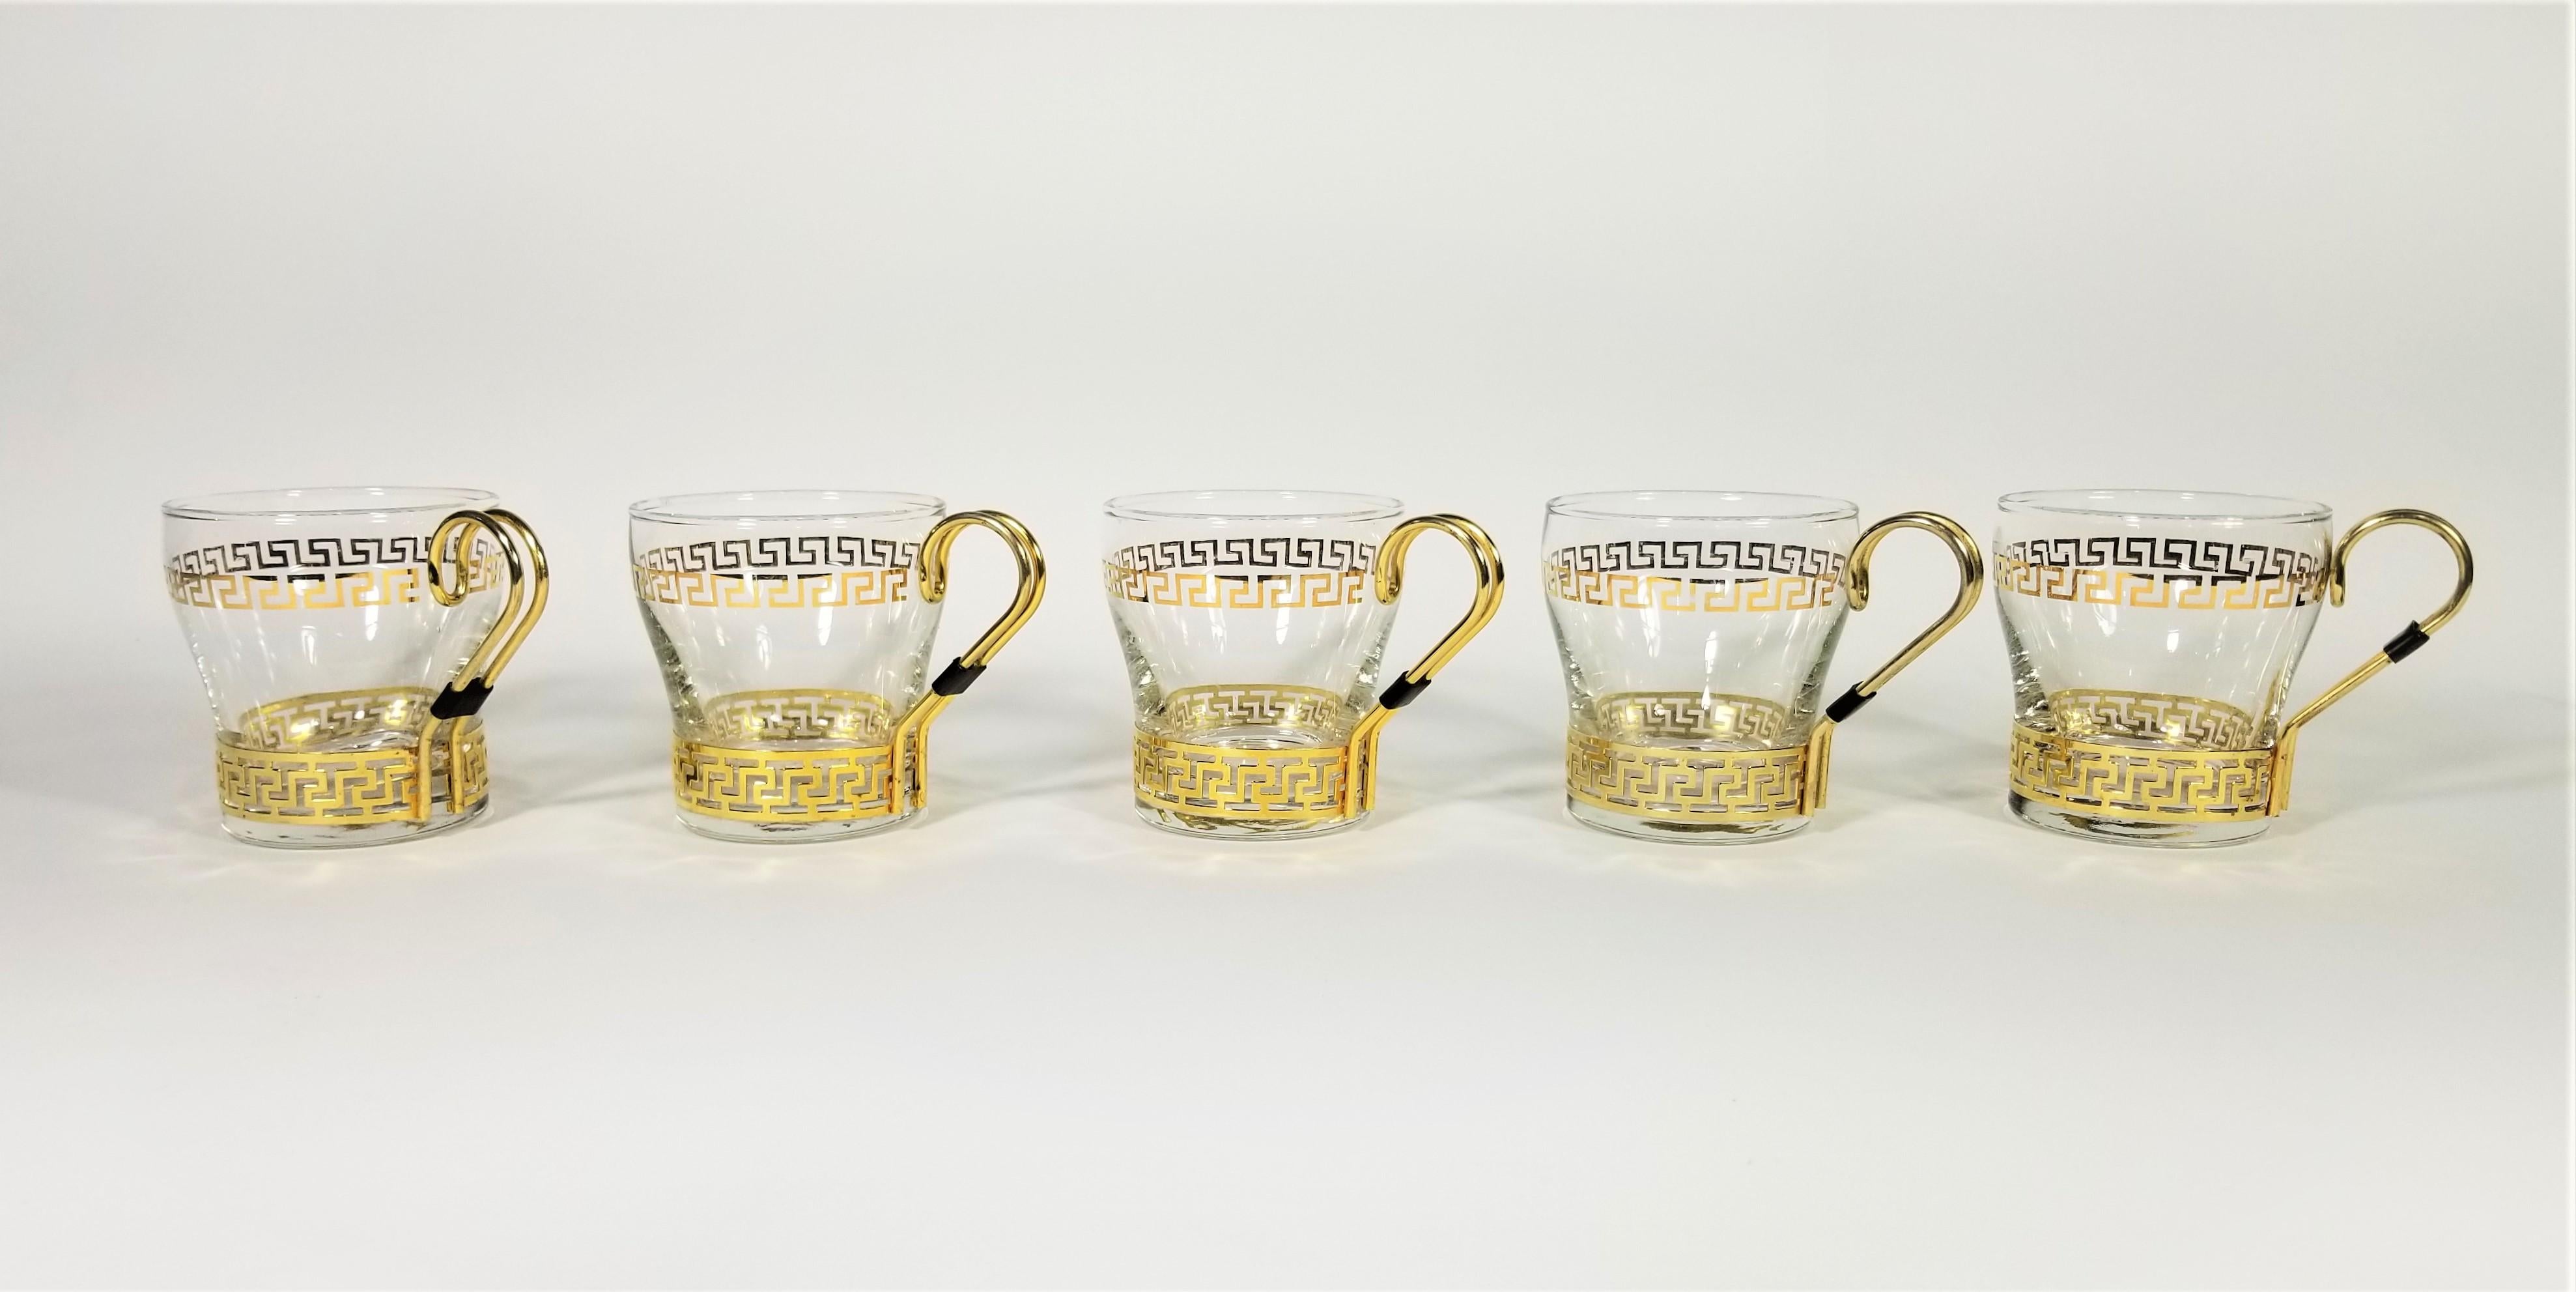 Midcentury libbey glassware barware with gold Greek key design. Set of 5.

Measurements:
Height 3.25 inches
Diameter top of glass 3.0 inches
Diameter including handle 4.25 inches.